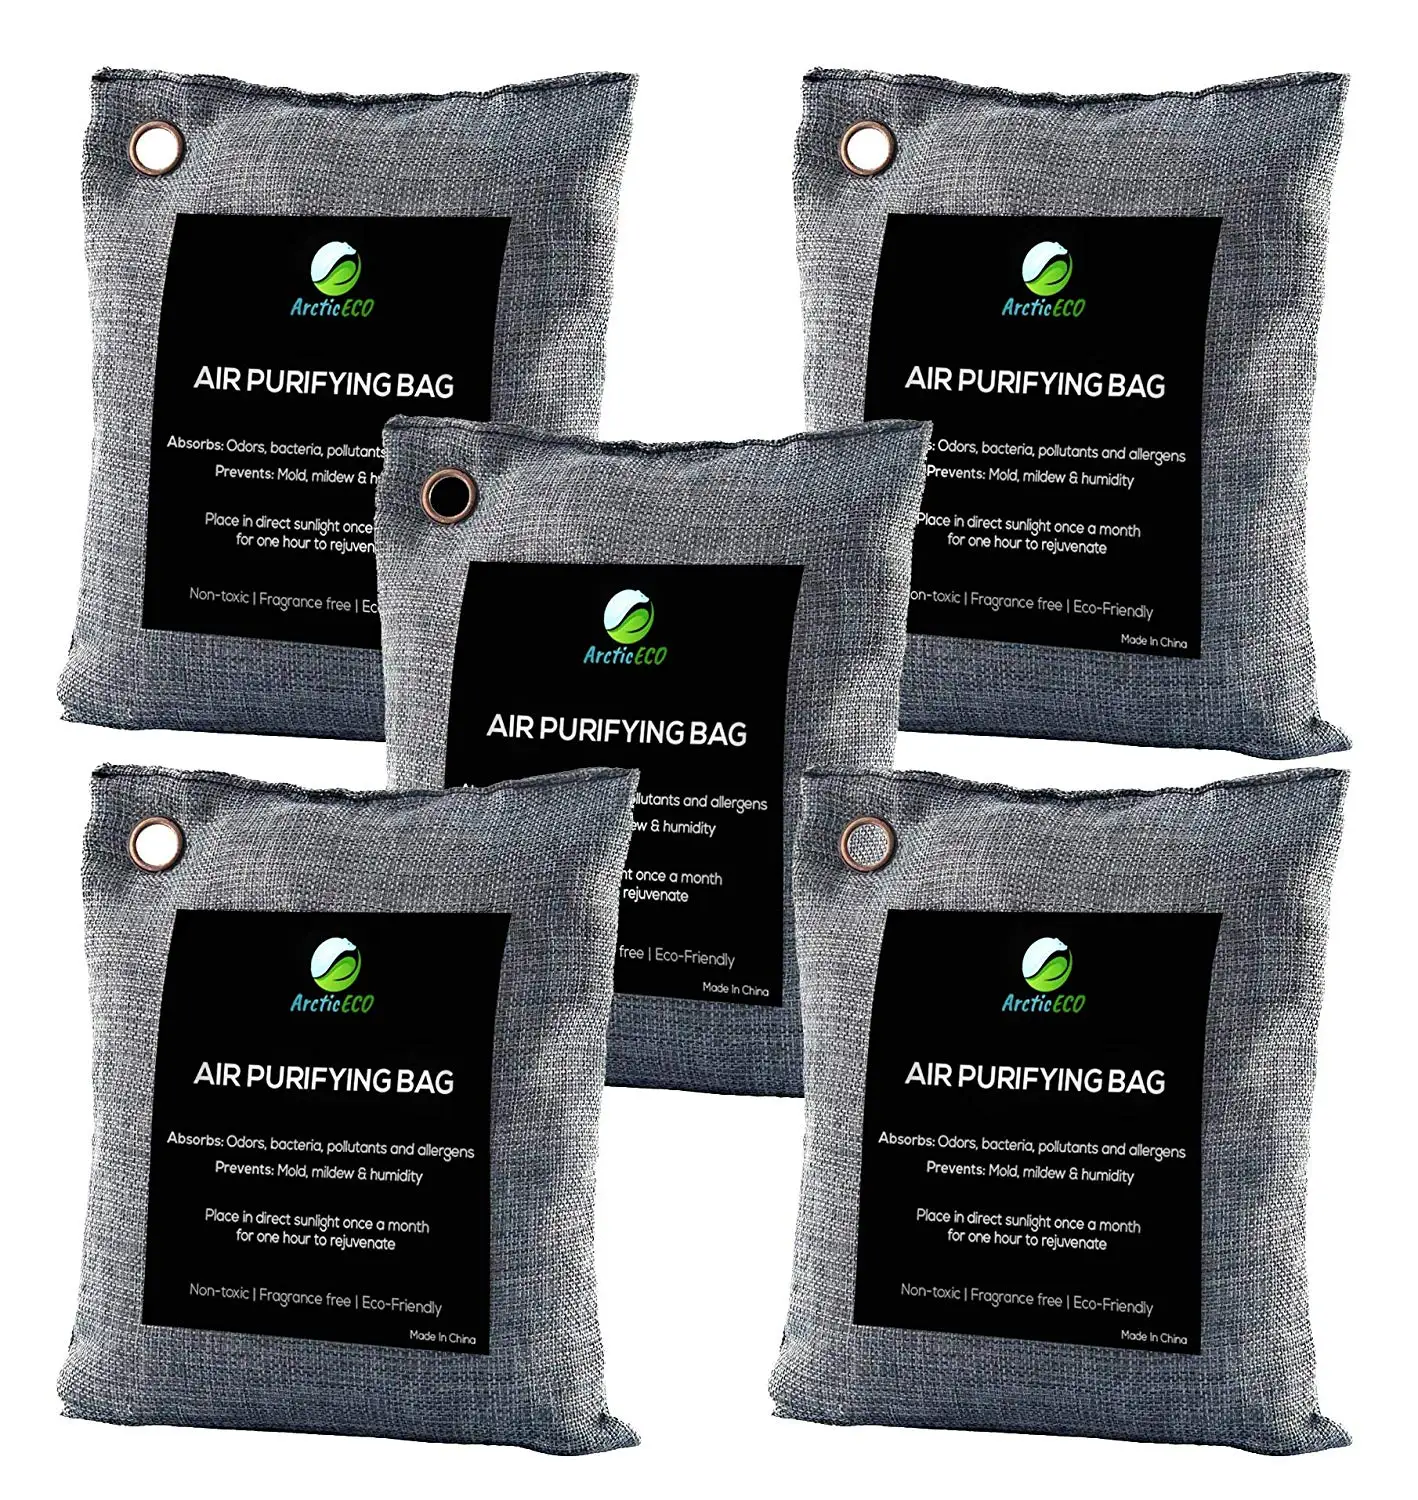 

Bamboo charcoal bag air purifying bag absorb the odor and air moisture 200g